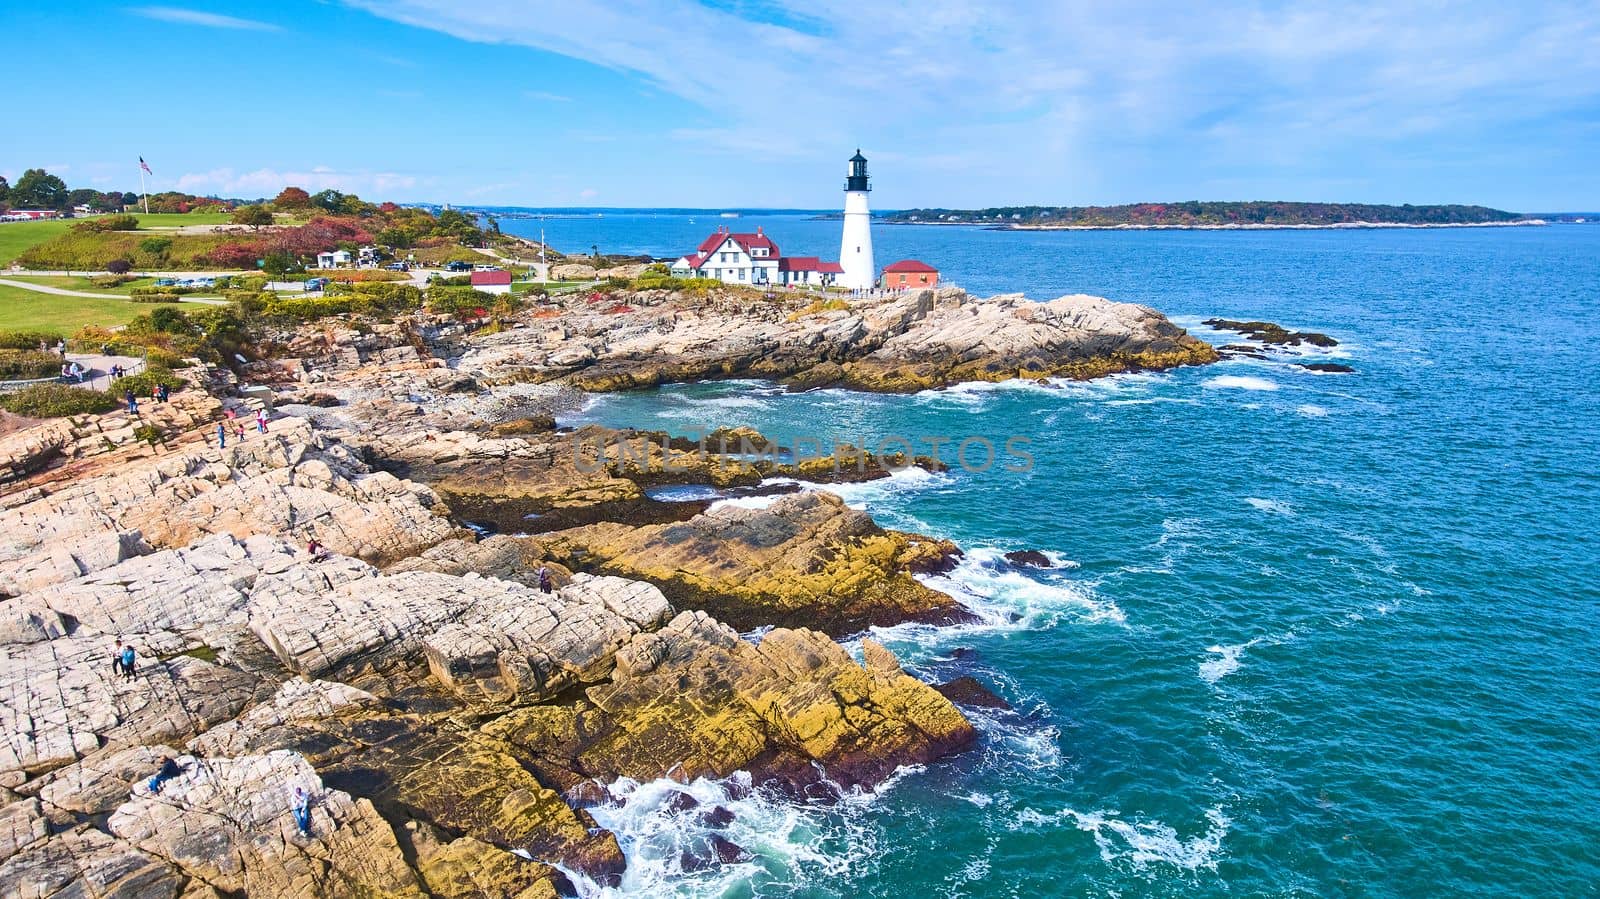 Lighthouse rests on stunning rocky Maine coastline from aerial view by njproductions